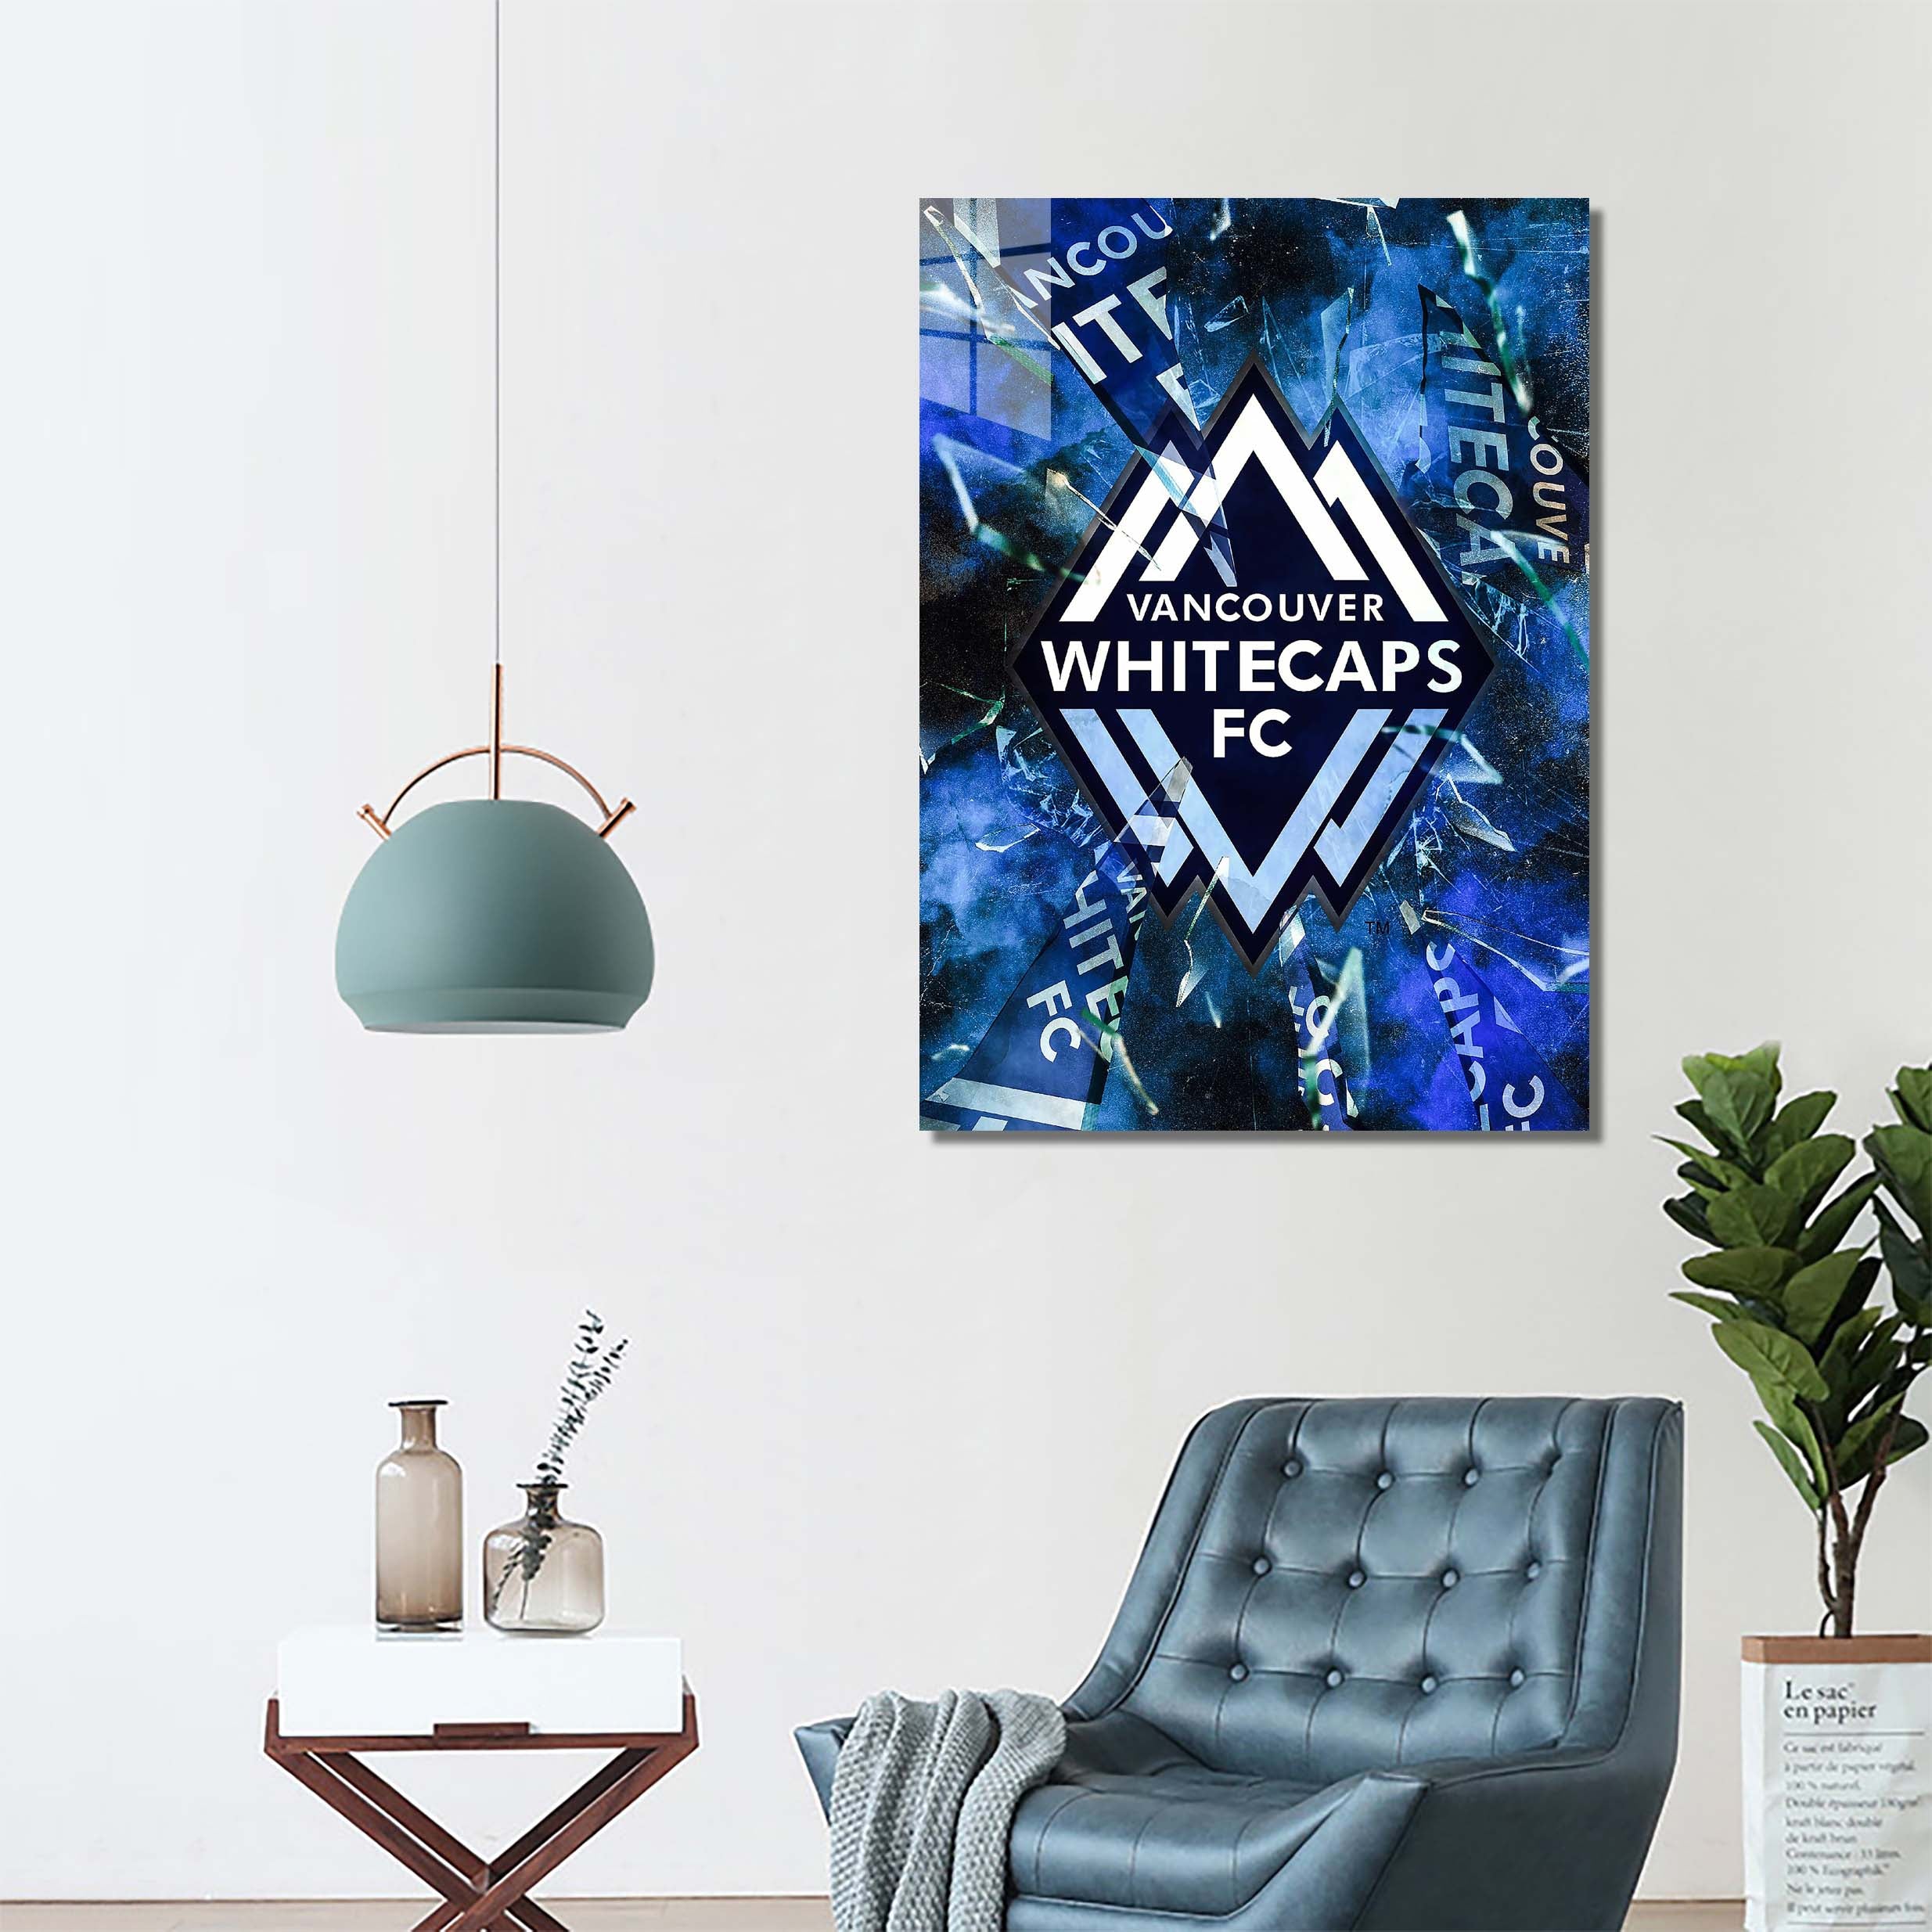 Vancouver Whitecaps-designed by @Hoang Van Thuan